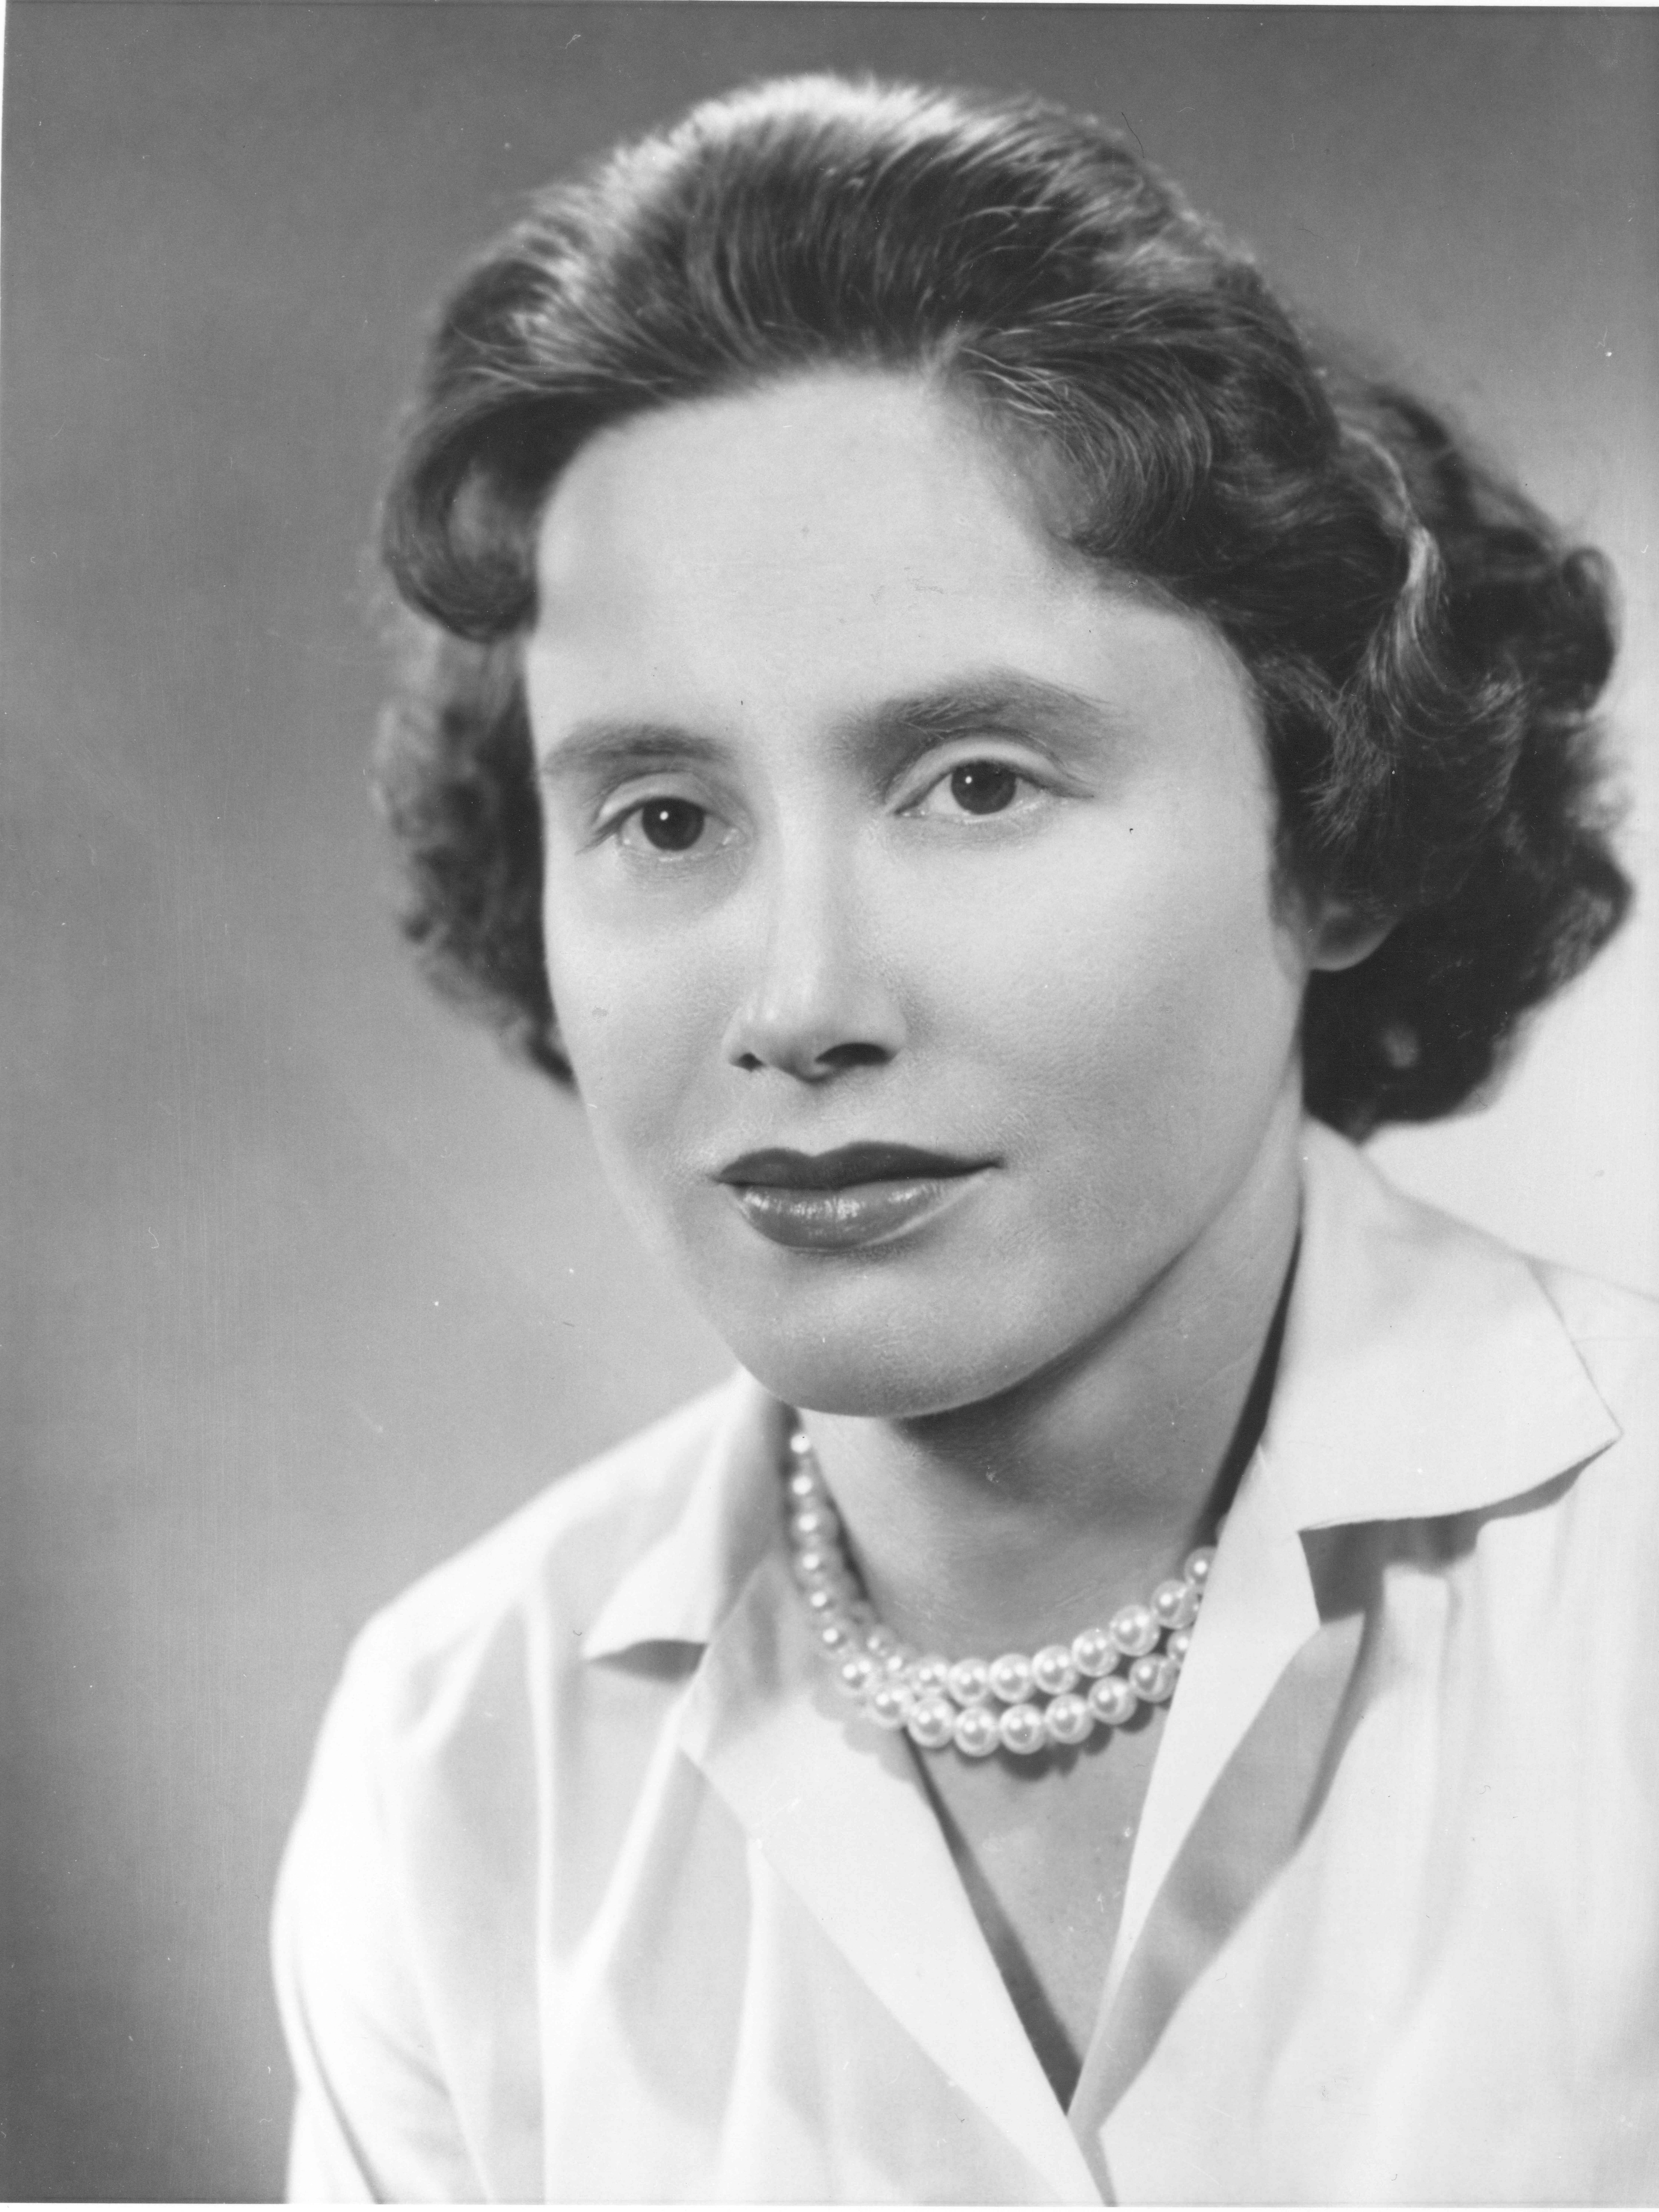 Dr. Ruth Kirschstein with curled hair wearing a pearl necklace and a collared white shirt